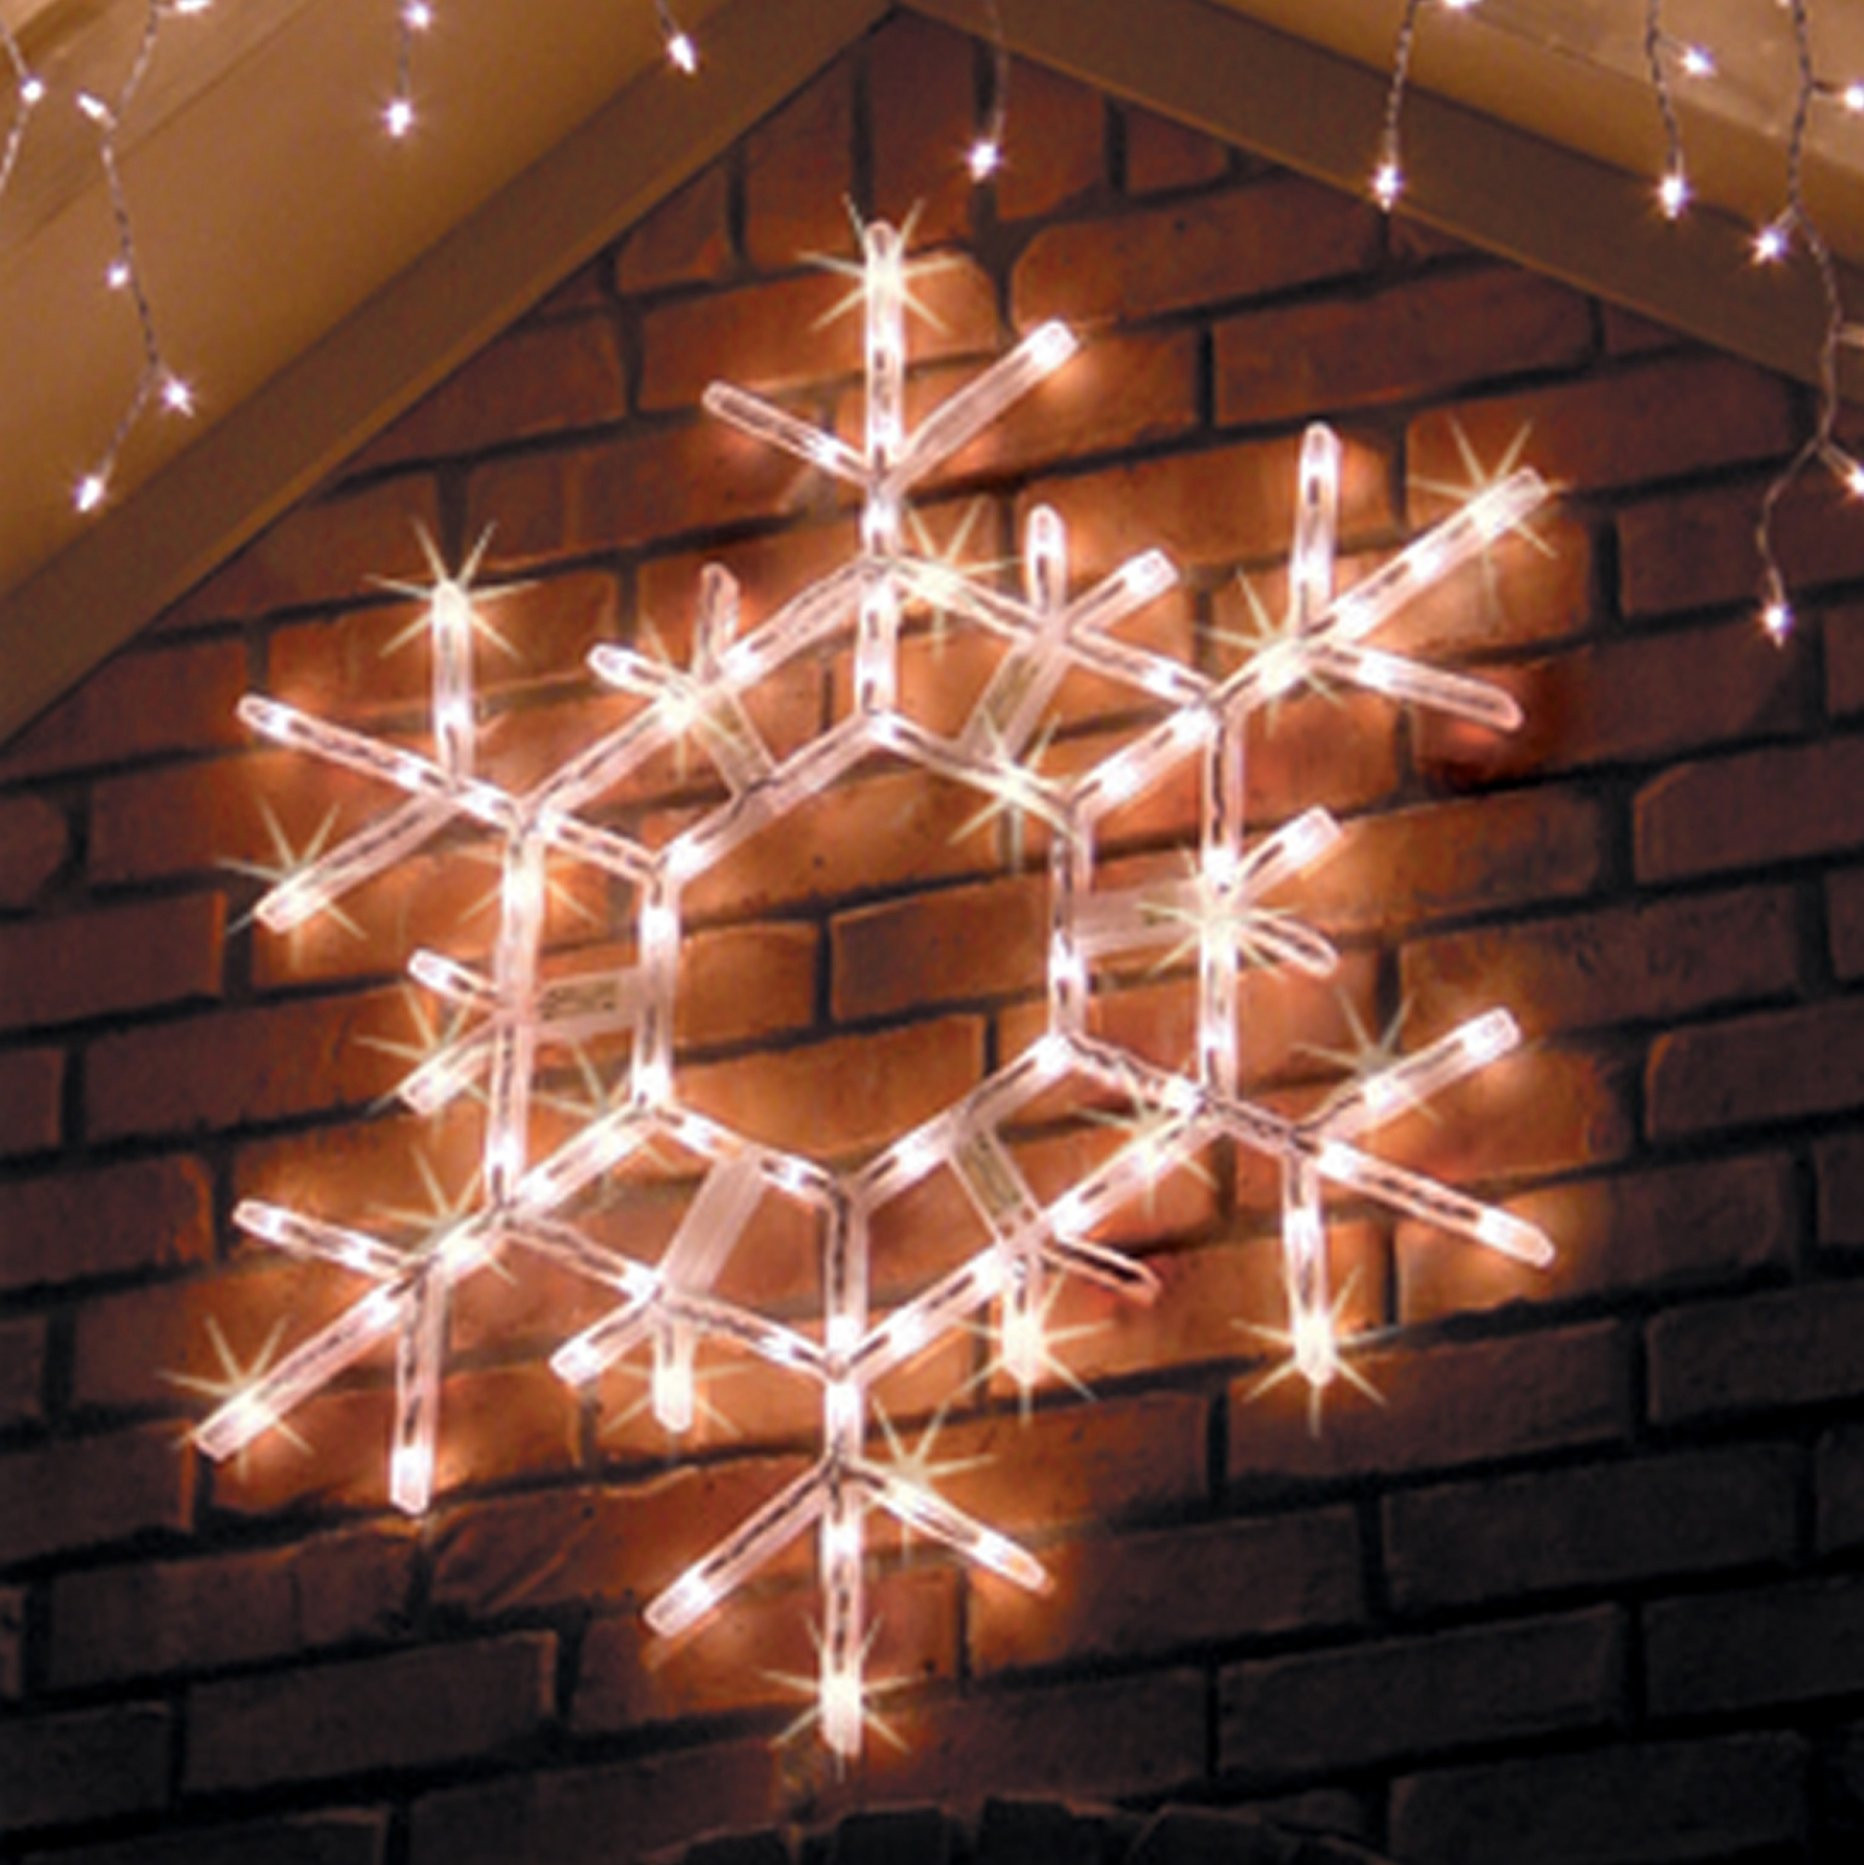 Large Outdoor Christmas Star
 Lighted Snowflakes & Stars Yard Envy